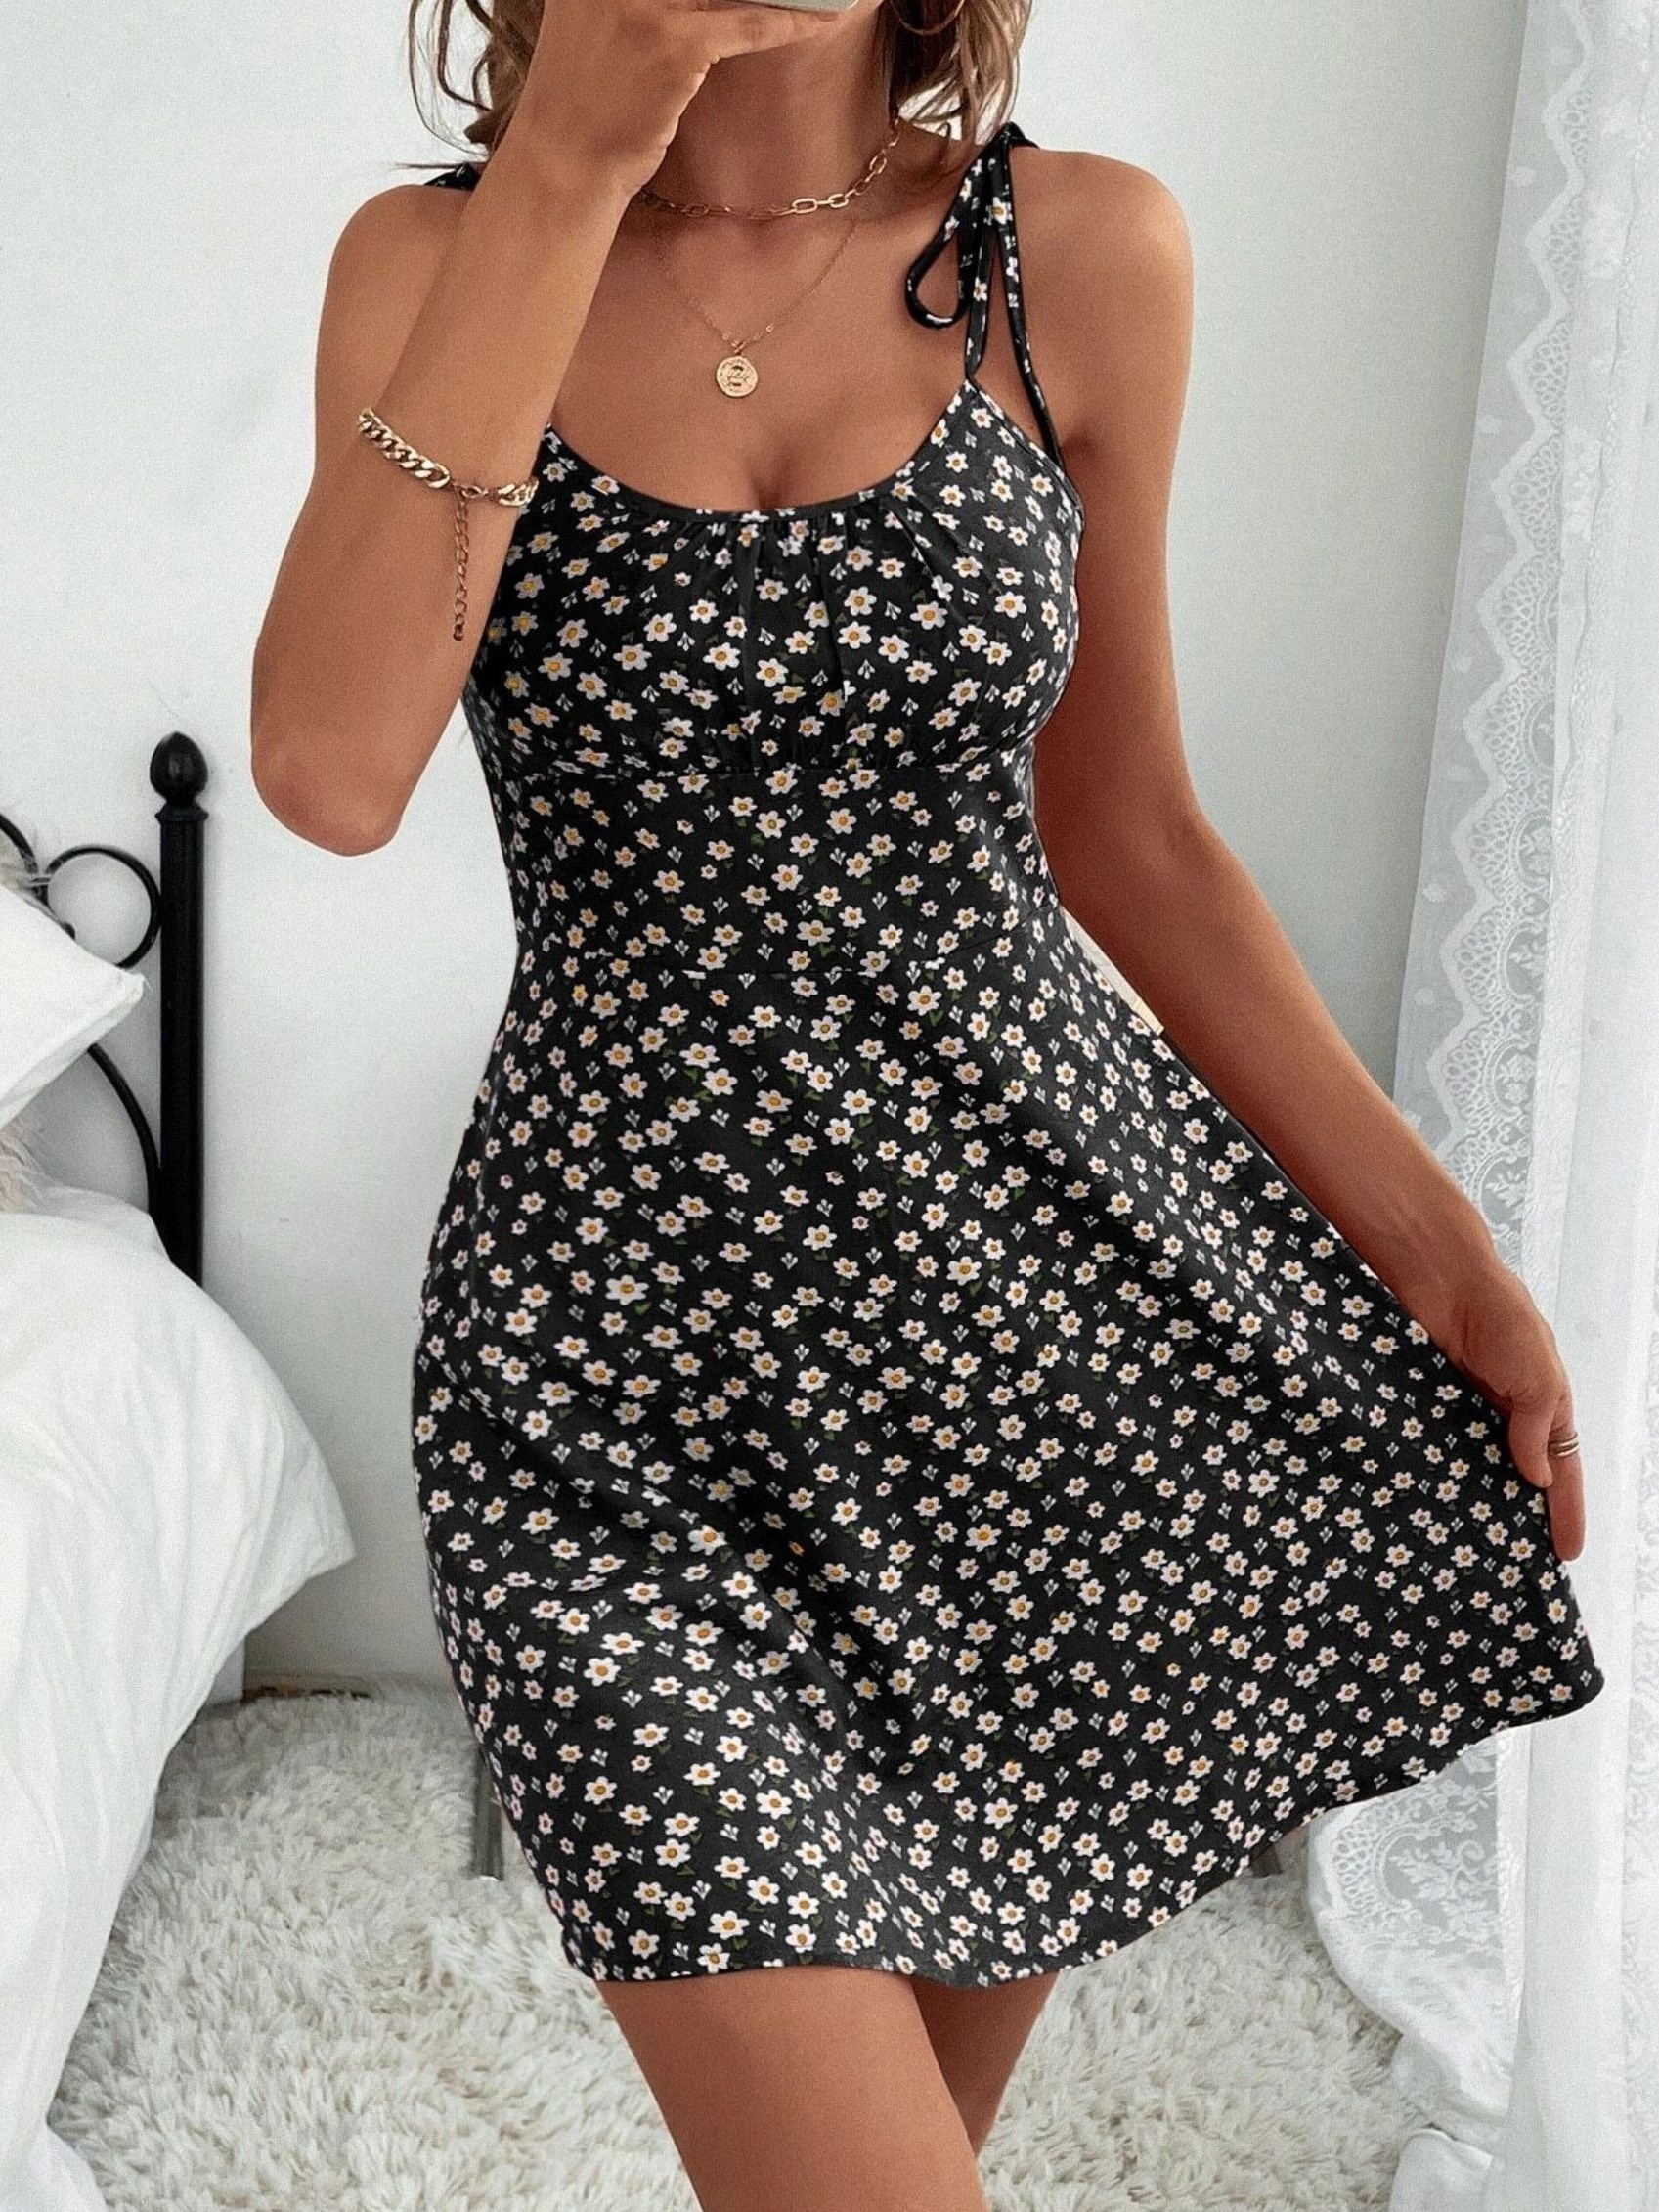  UIRPK CamiBloom - Floral Printed Camisole Dress Womens Summer  Loose-Fit Printed Camisole Mini Dress Tank Sundress (Black,L) : Clothing,  Shoes & Jewelry